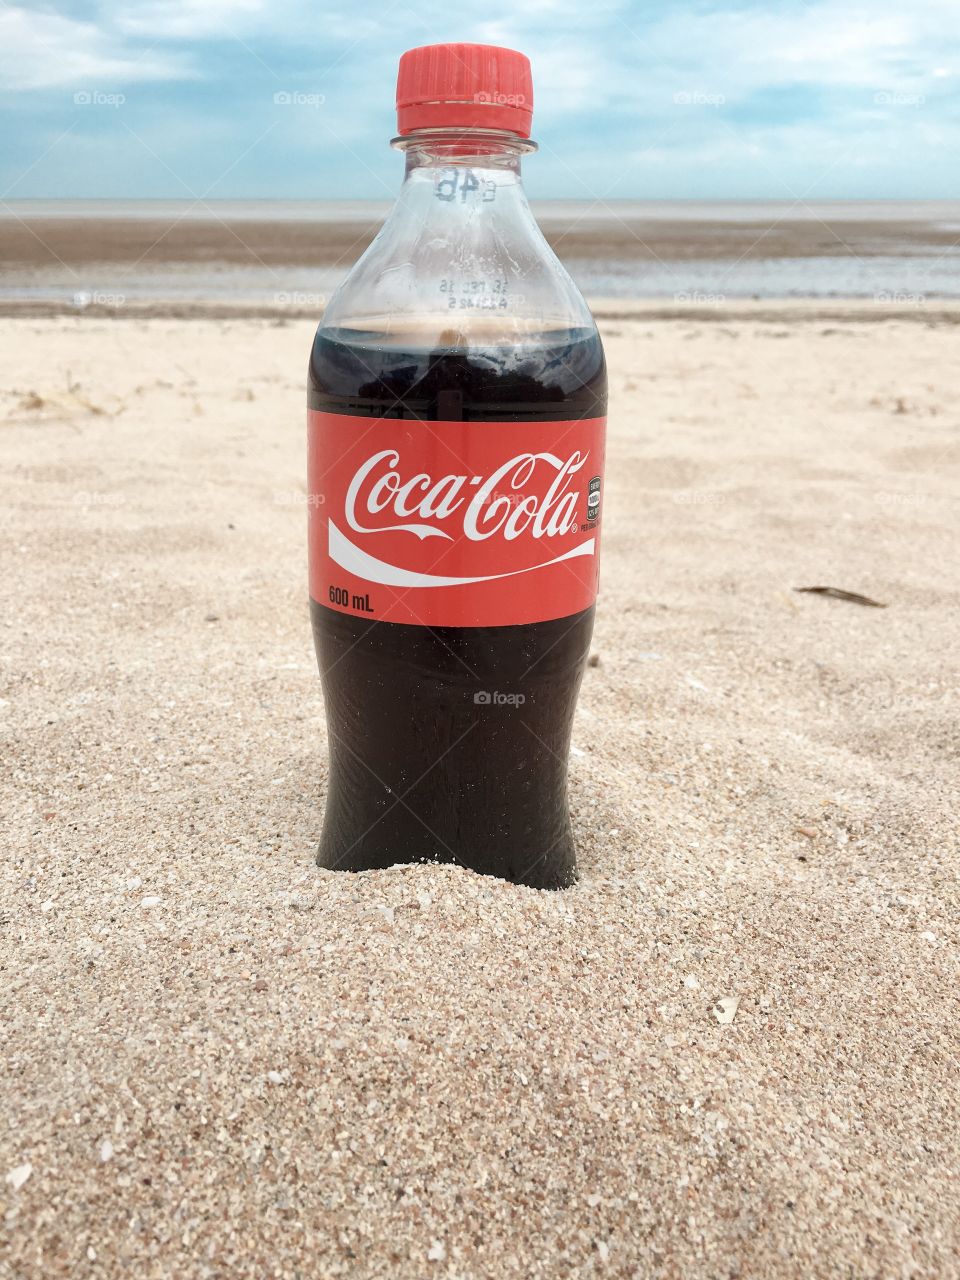 Single bottle of Coca Cola  in the sand set against the backdrop of sky ocean beach 